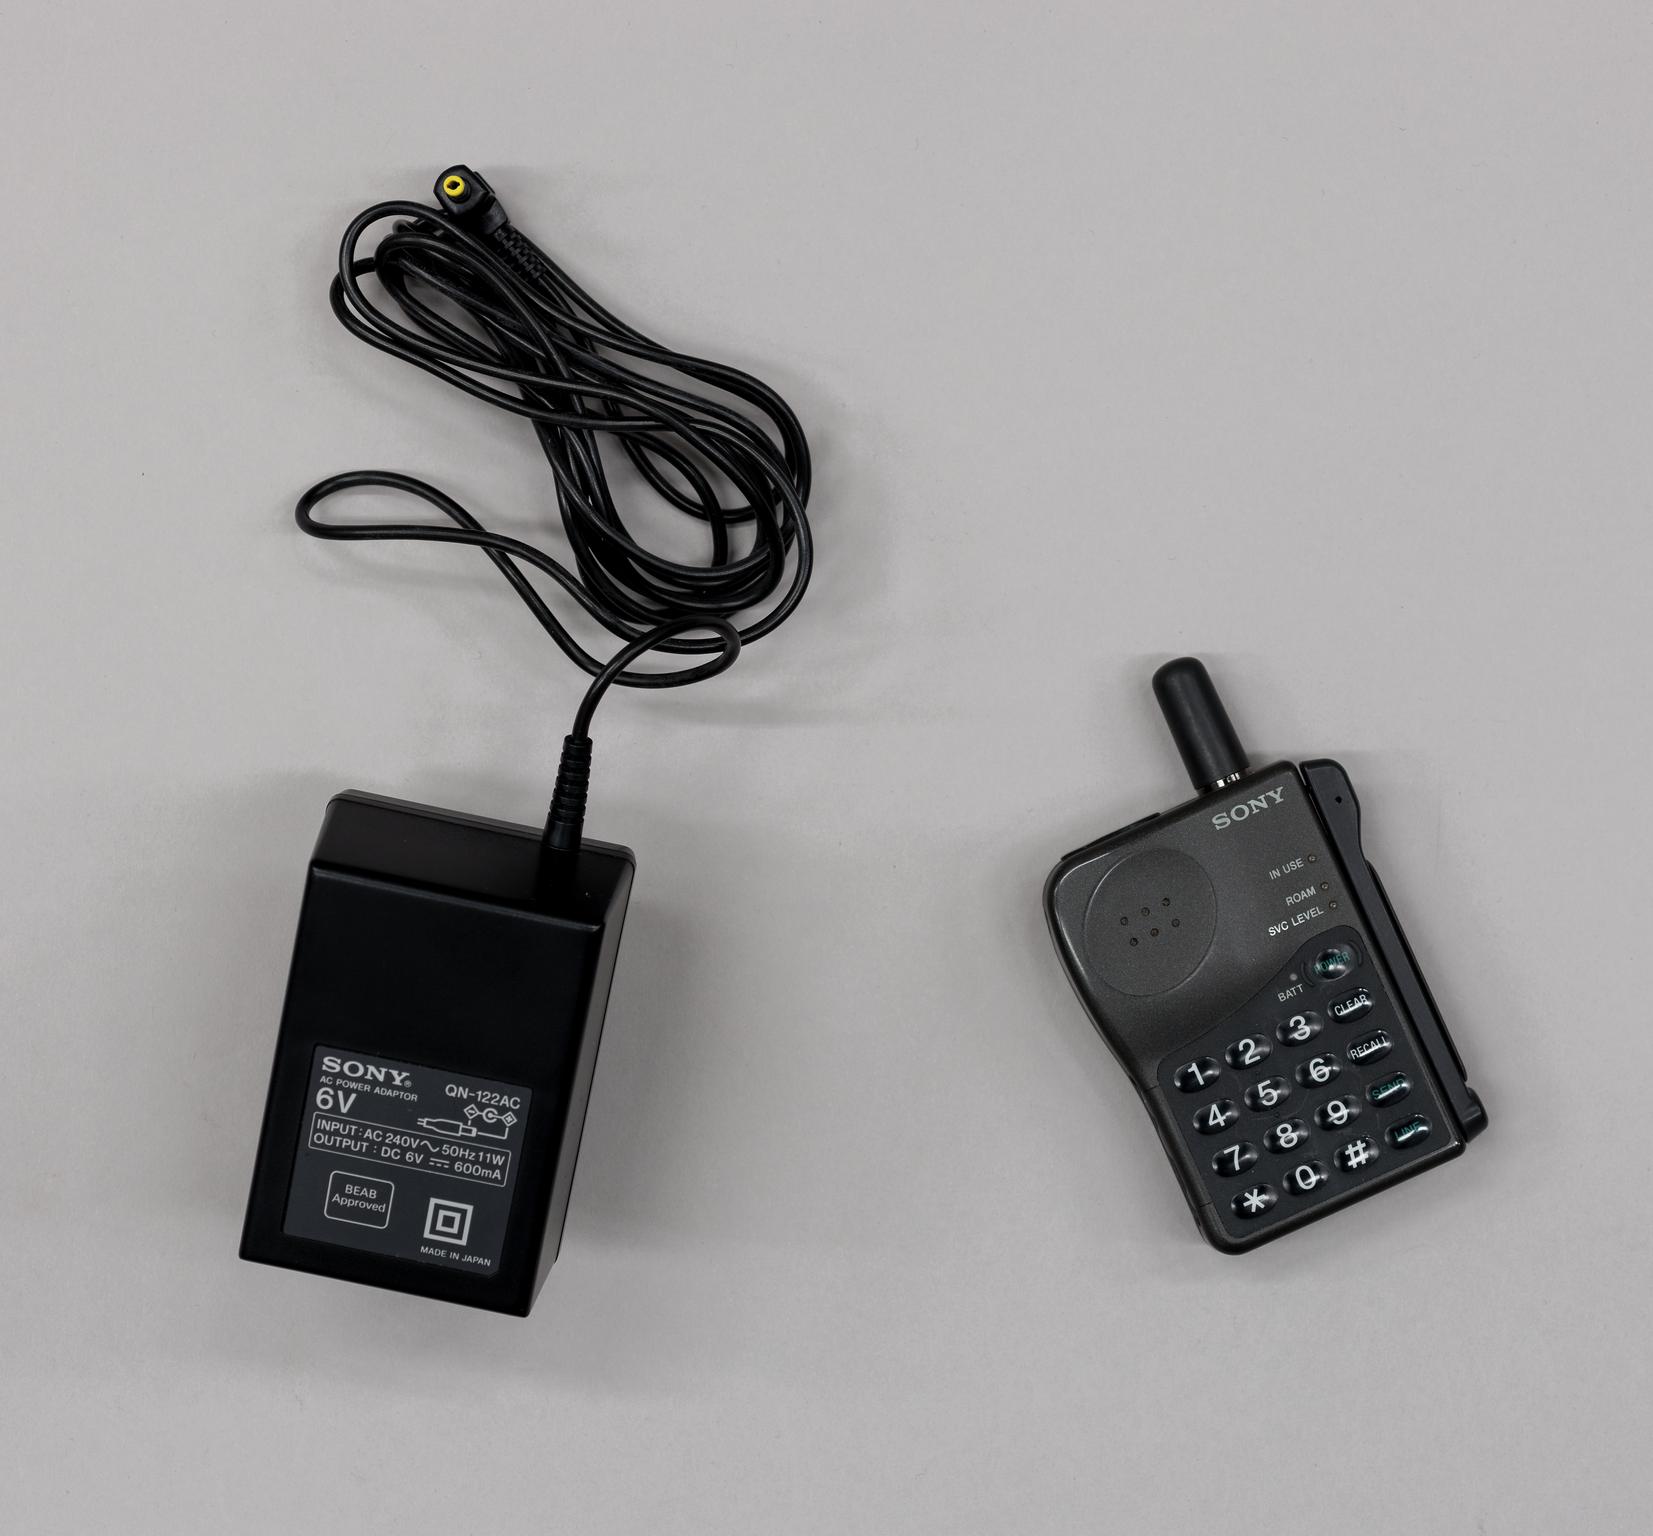 Sony CM-R111 mobile phone and Adaptor for Sony CM-R111 mobile phone.